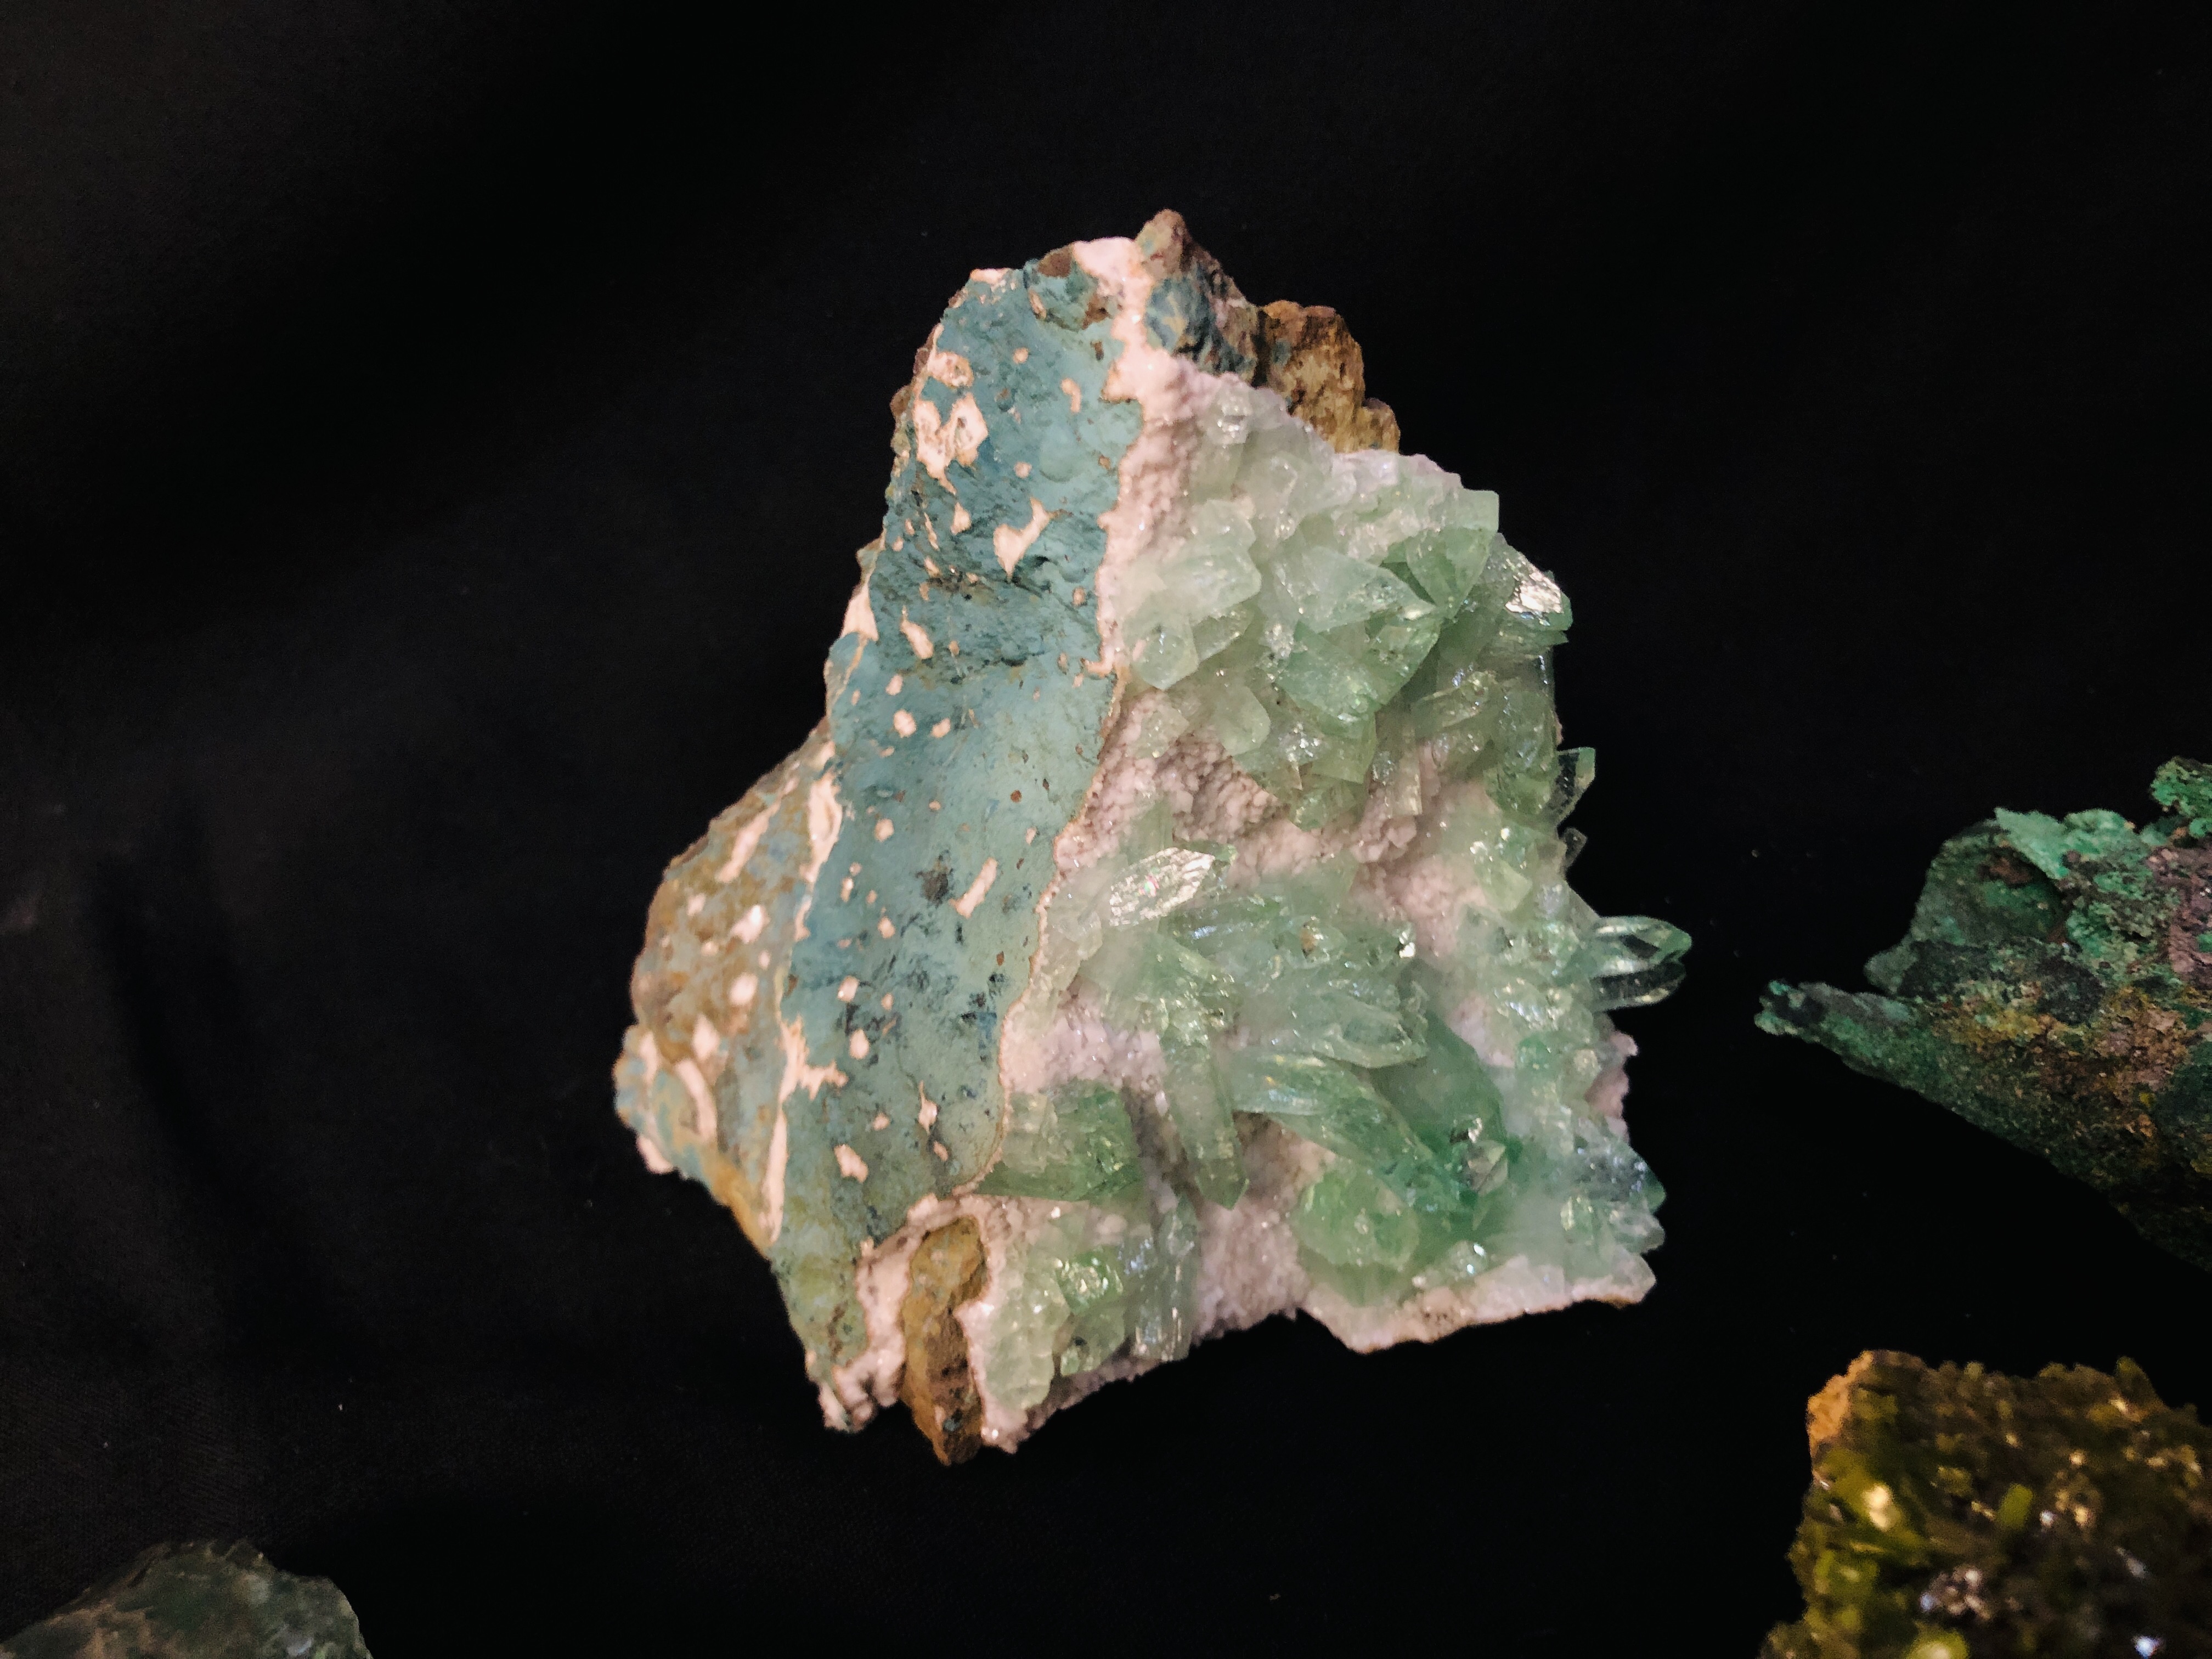 A COLLECTION OF APPROX 4 CRYSTAL AND MINERAL ROCK EXAMPLES TO INCLUDE QUARTZ AND FLUORITE ETC. - Image 3 of 5